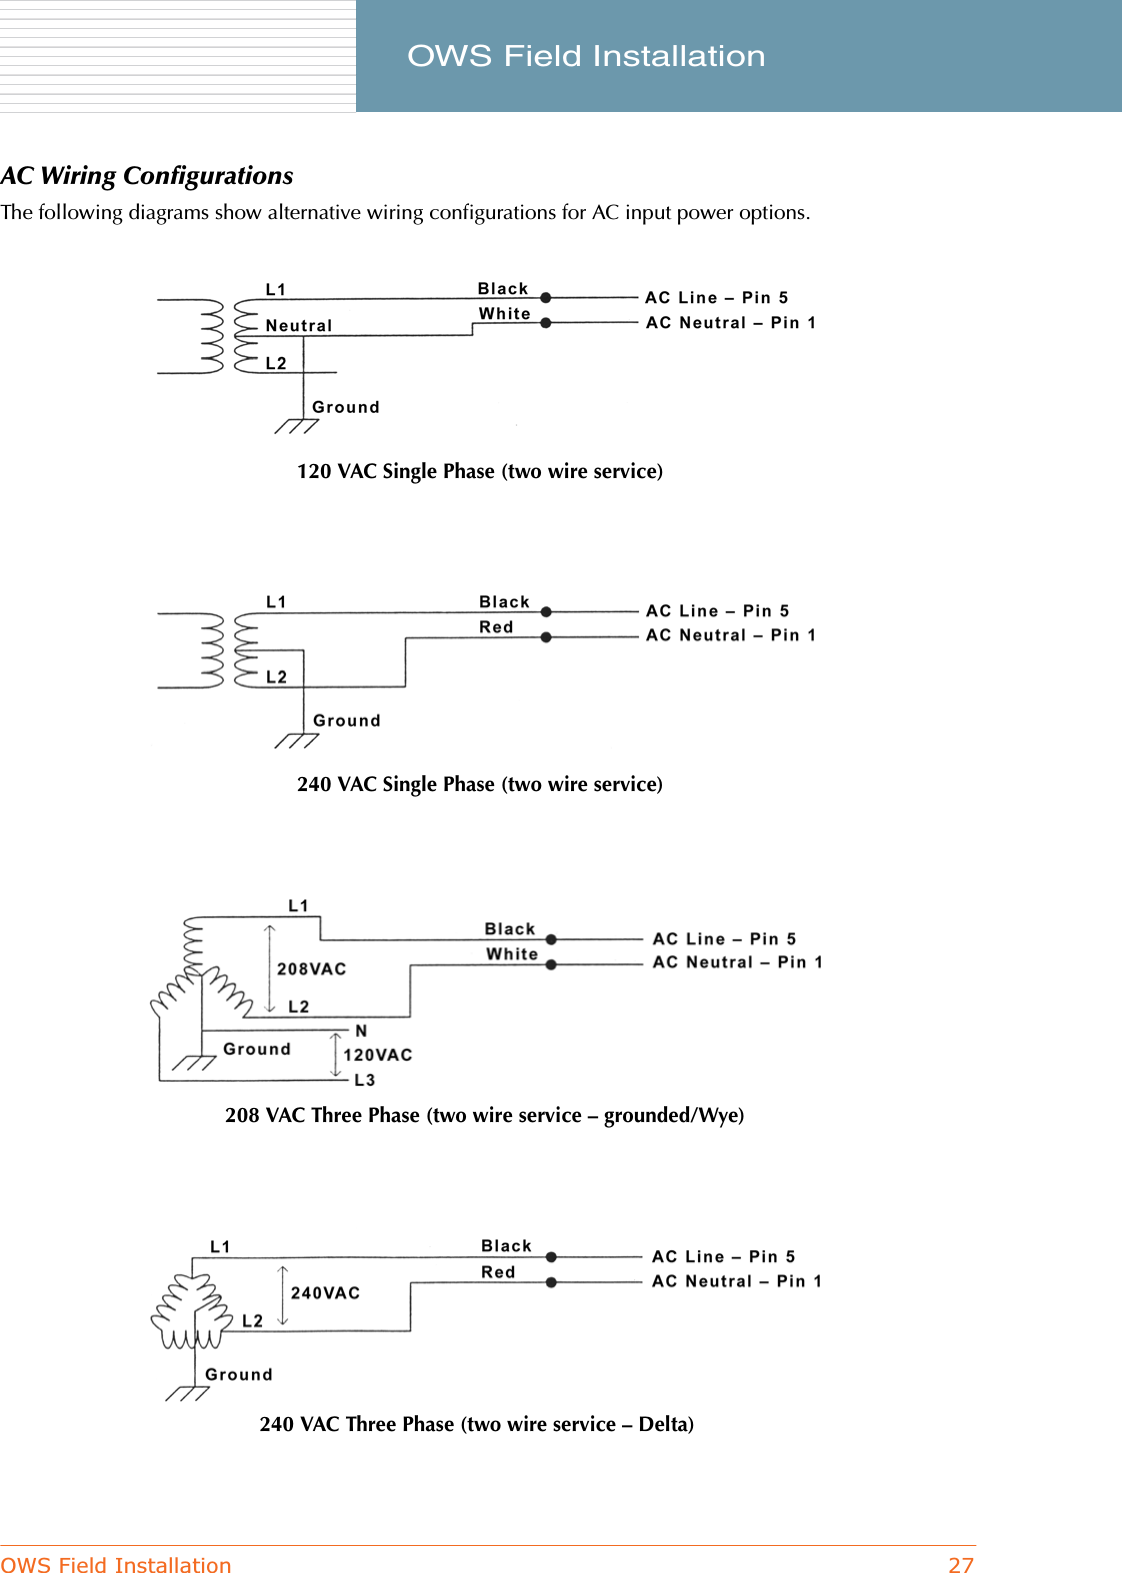 OWS Field Installation 27     OWS Field InstallationAC Wiring ConfigurationsThe following diagrams show alternative wiring configurations for AC input power options.120 VAC Single Phase (two wire service)240 VAC Single Phase (two wire service)208 VAC Three Phase (two wire service – grounded/Wye) 240 VAC Three Phase (two wire service – Delta)